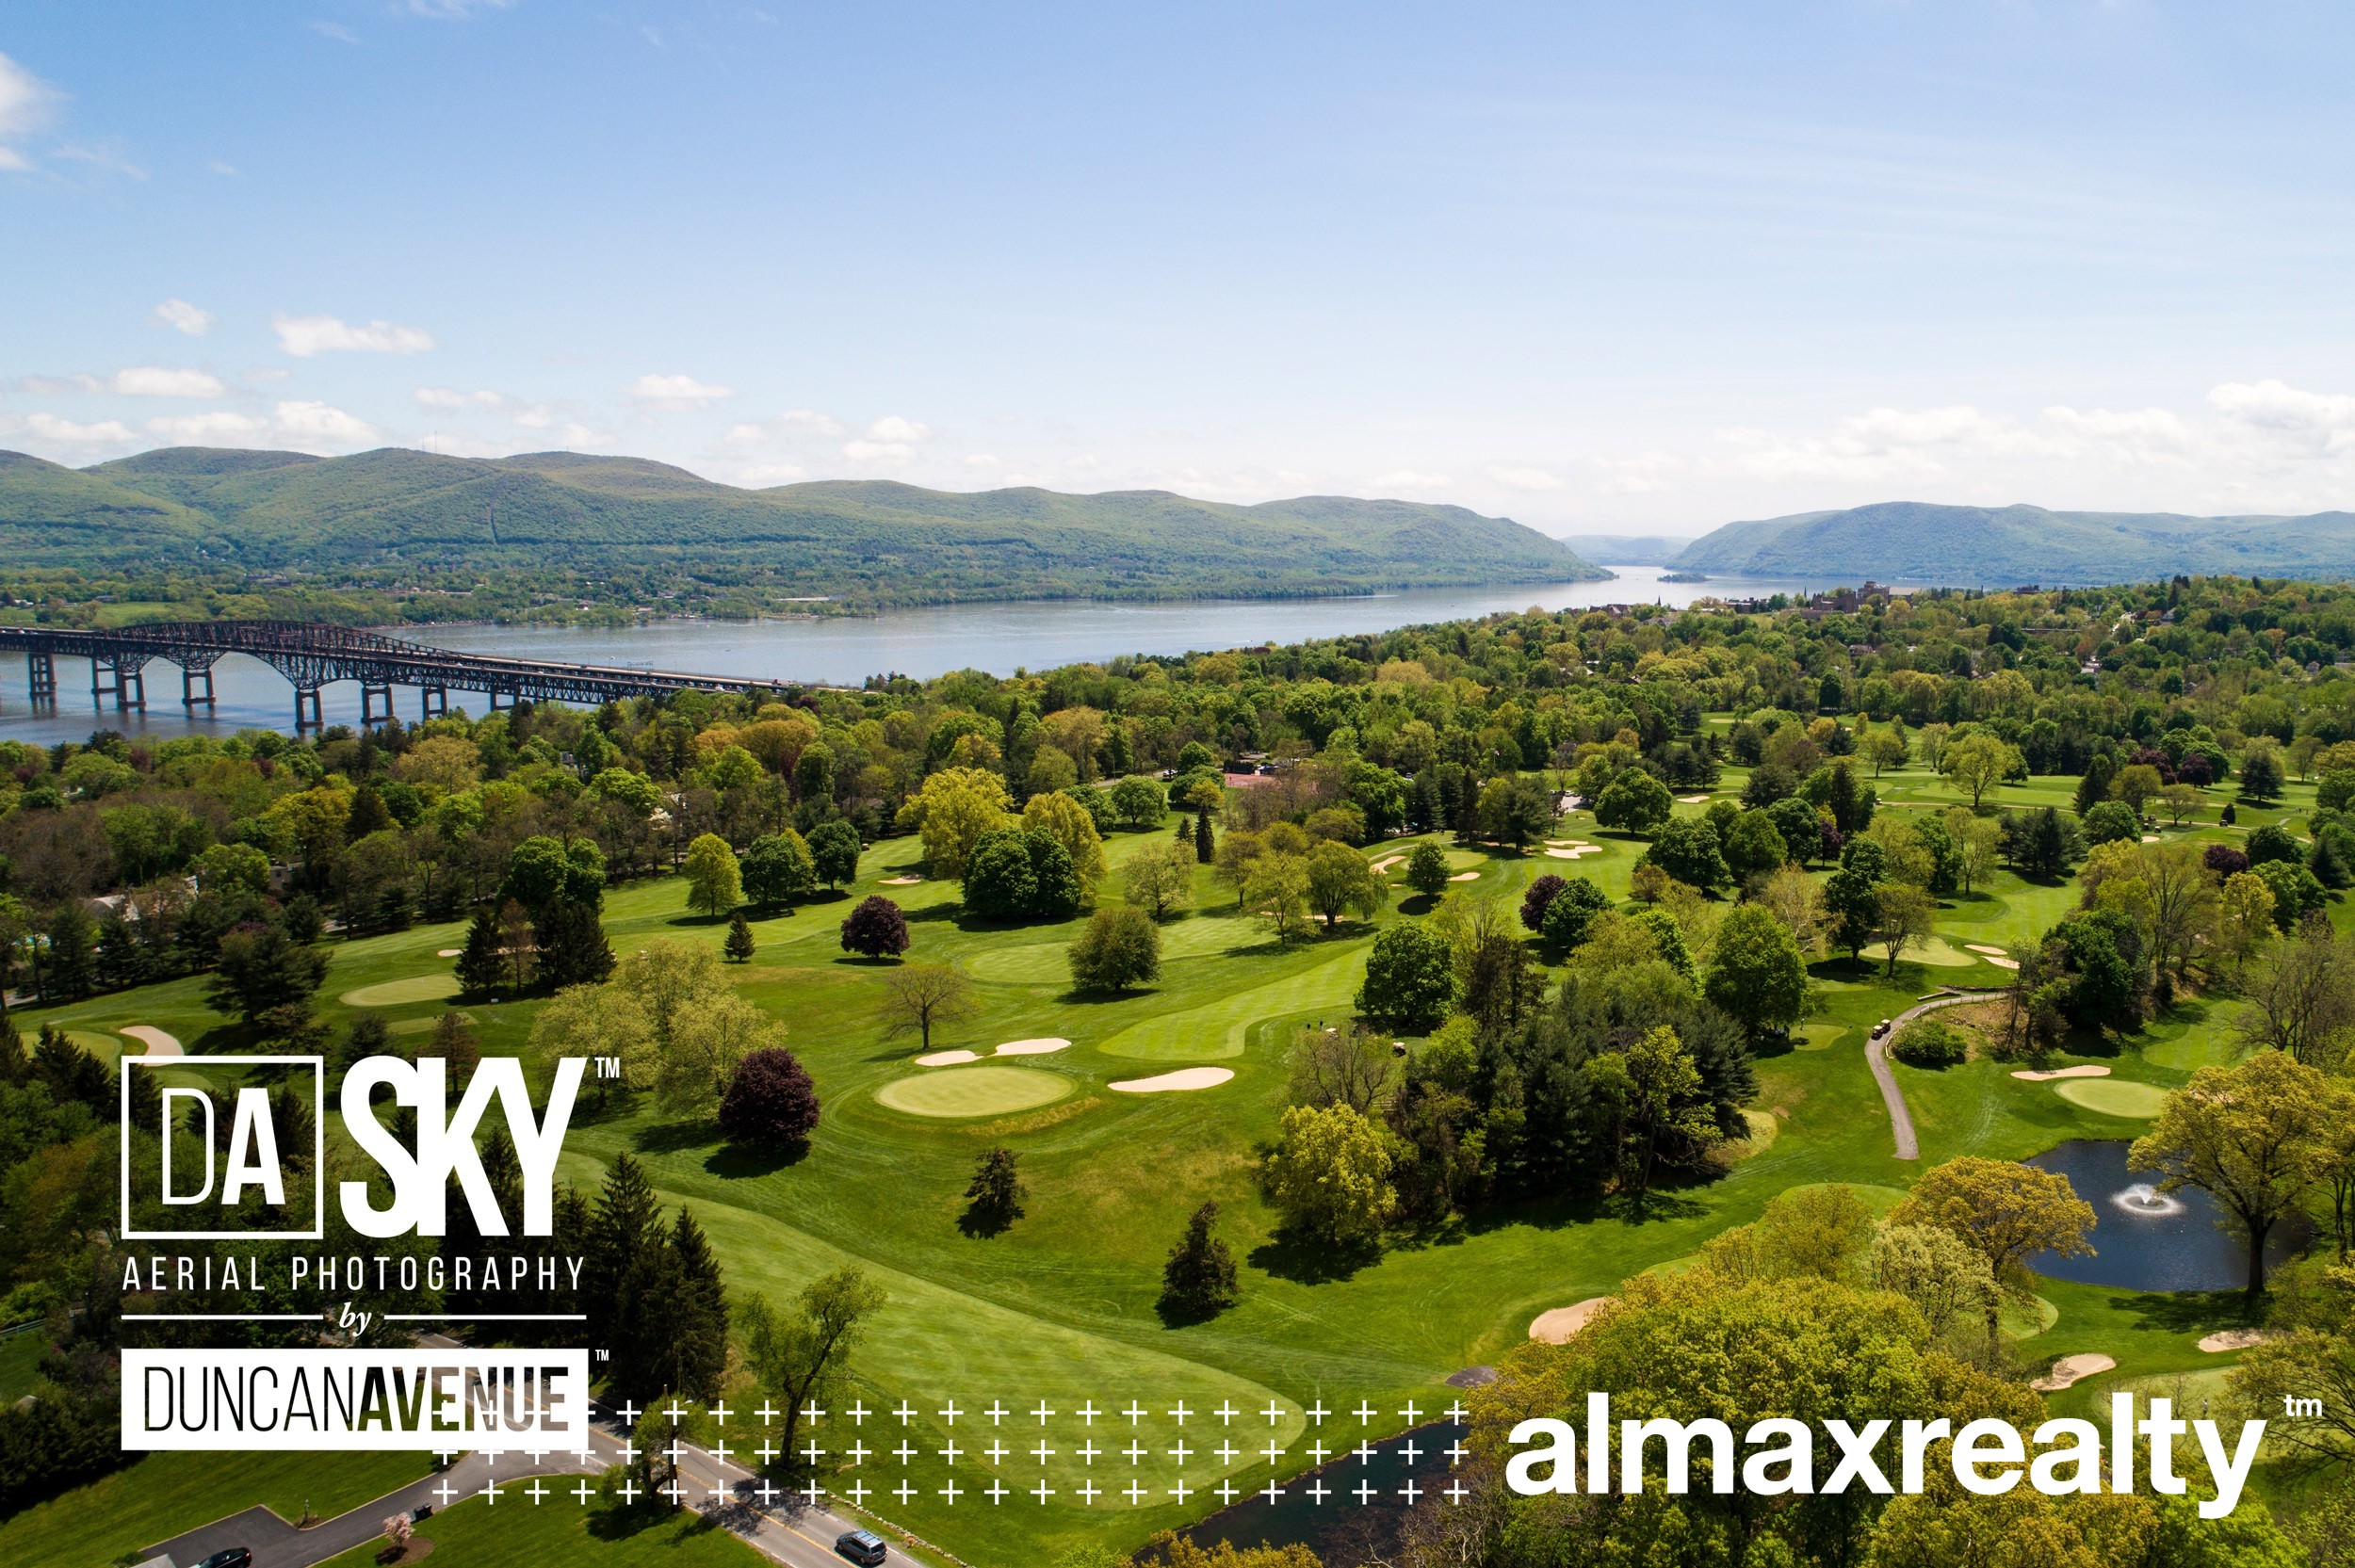 Alexander Maxwell Realty - Hudson Valley Real Estate